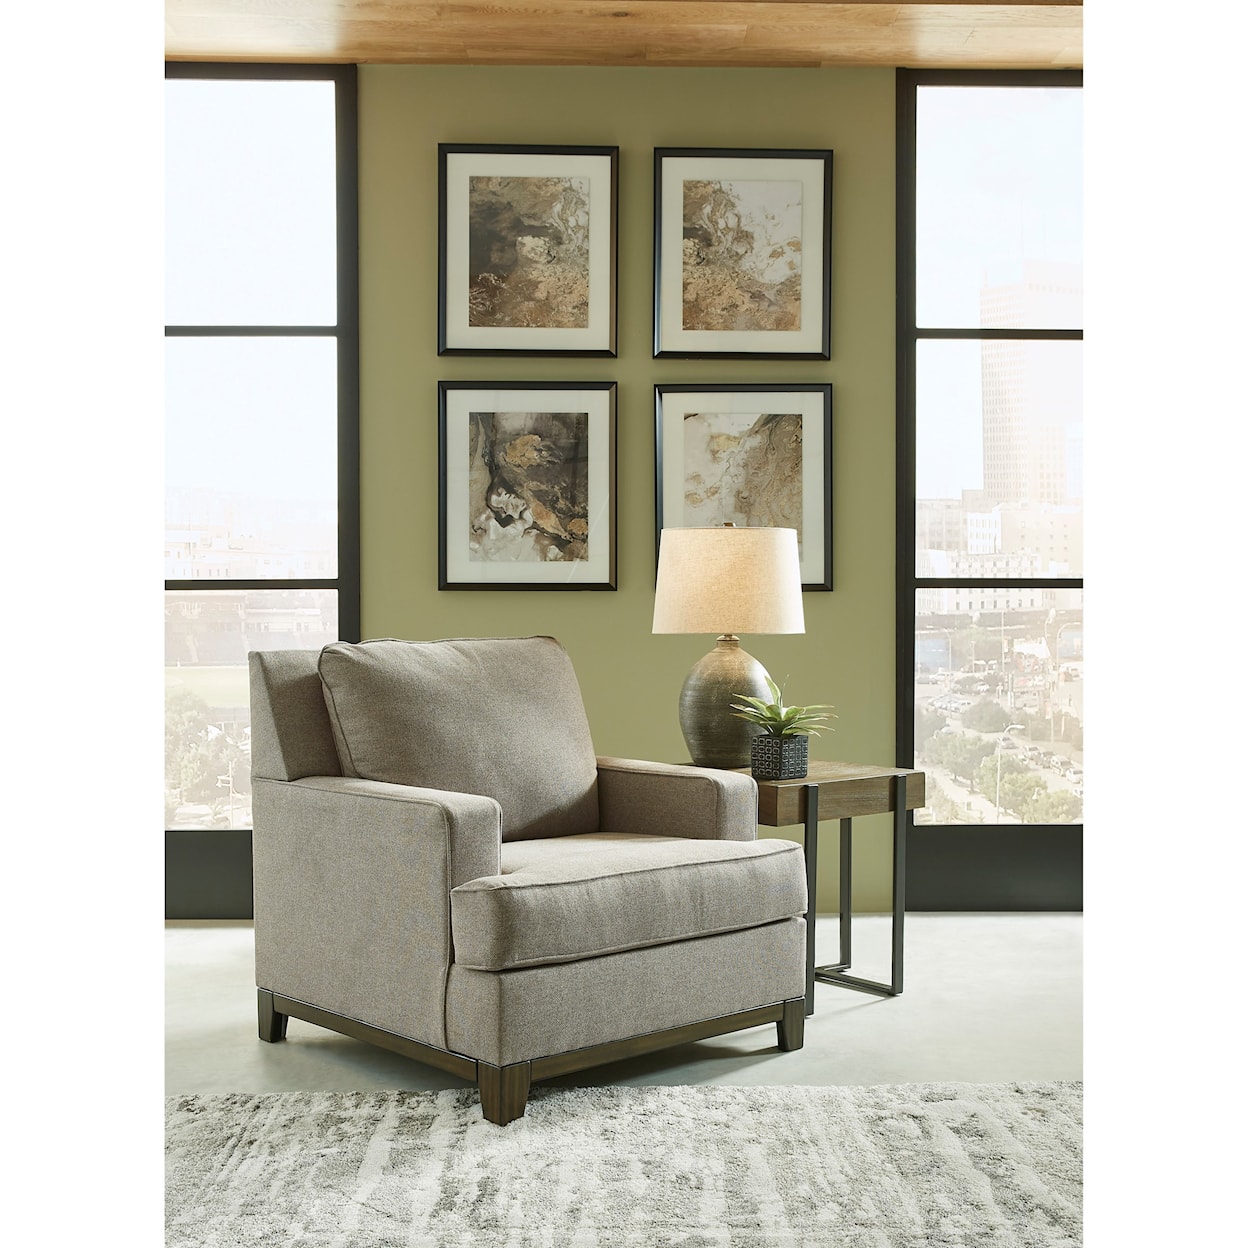 Signature Design by Ashley Furniture Kaywood Chair